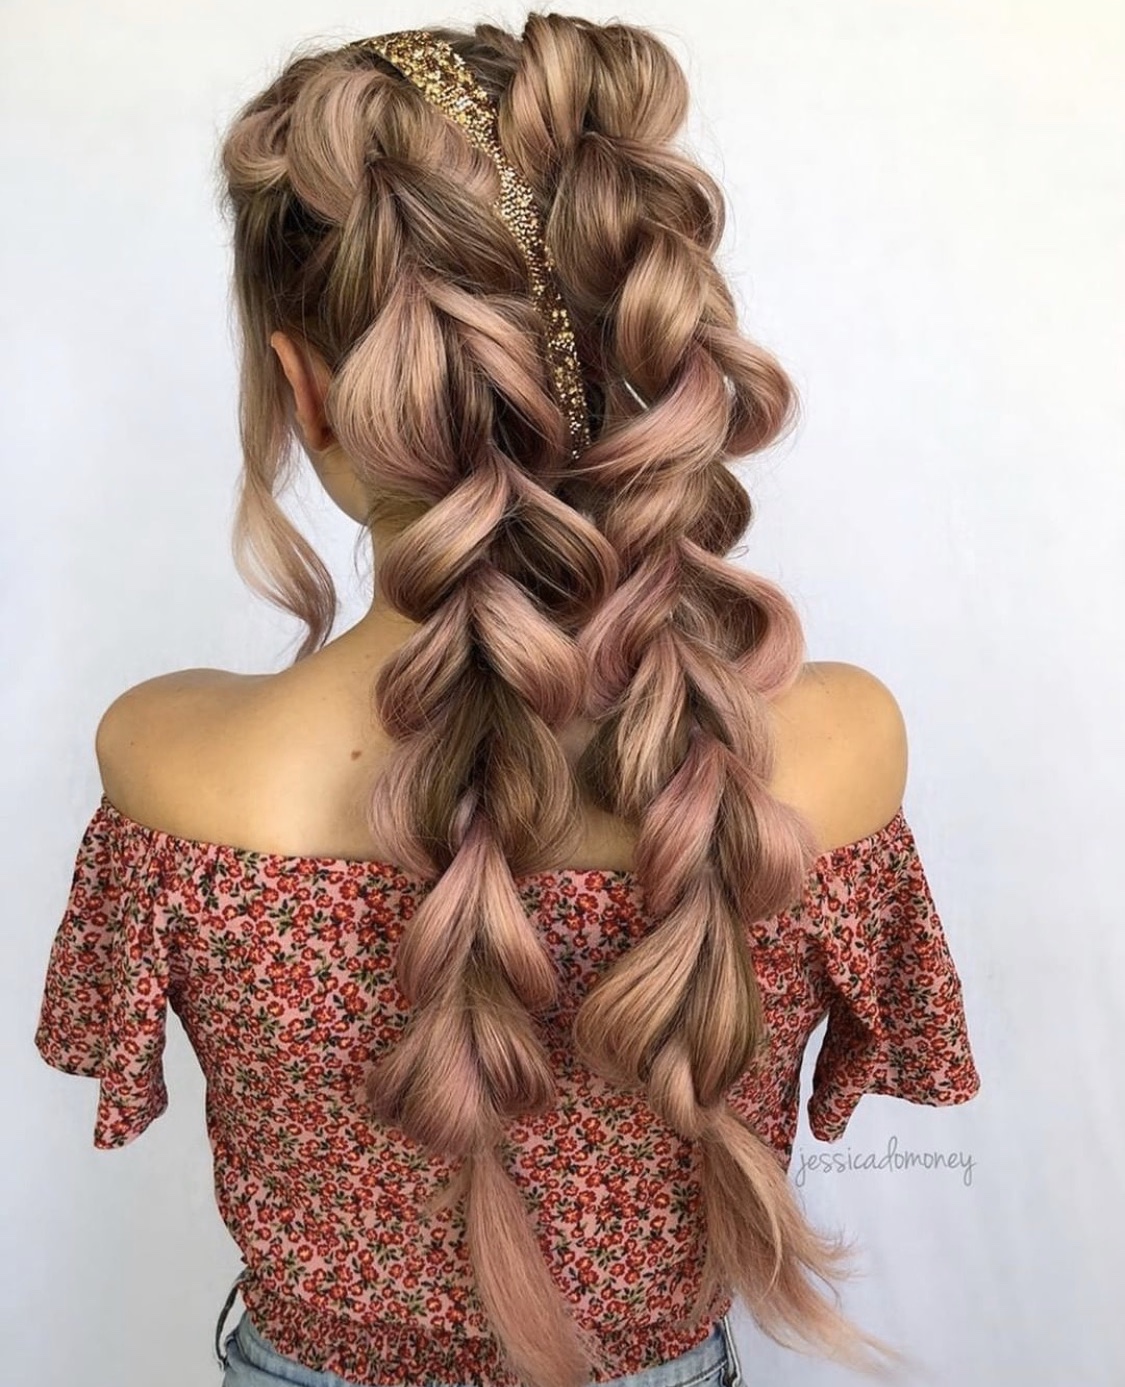 Party Hairstyles, Paisley Hair Salon